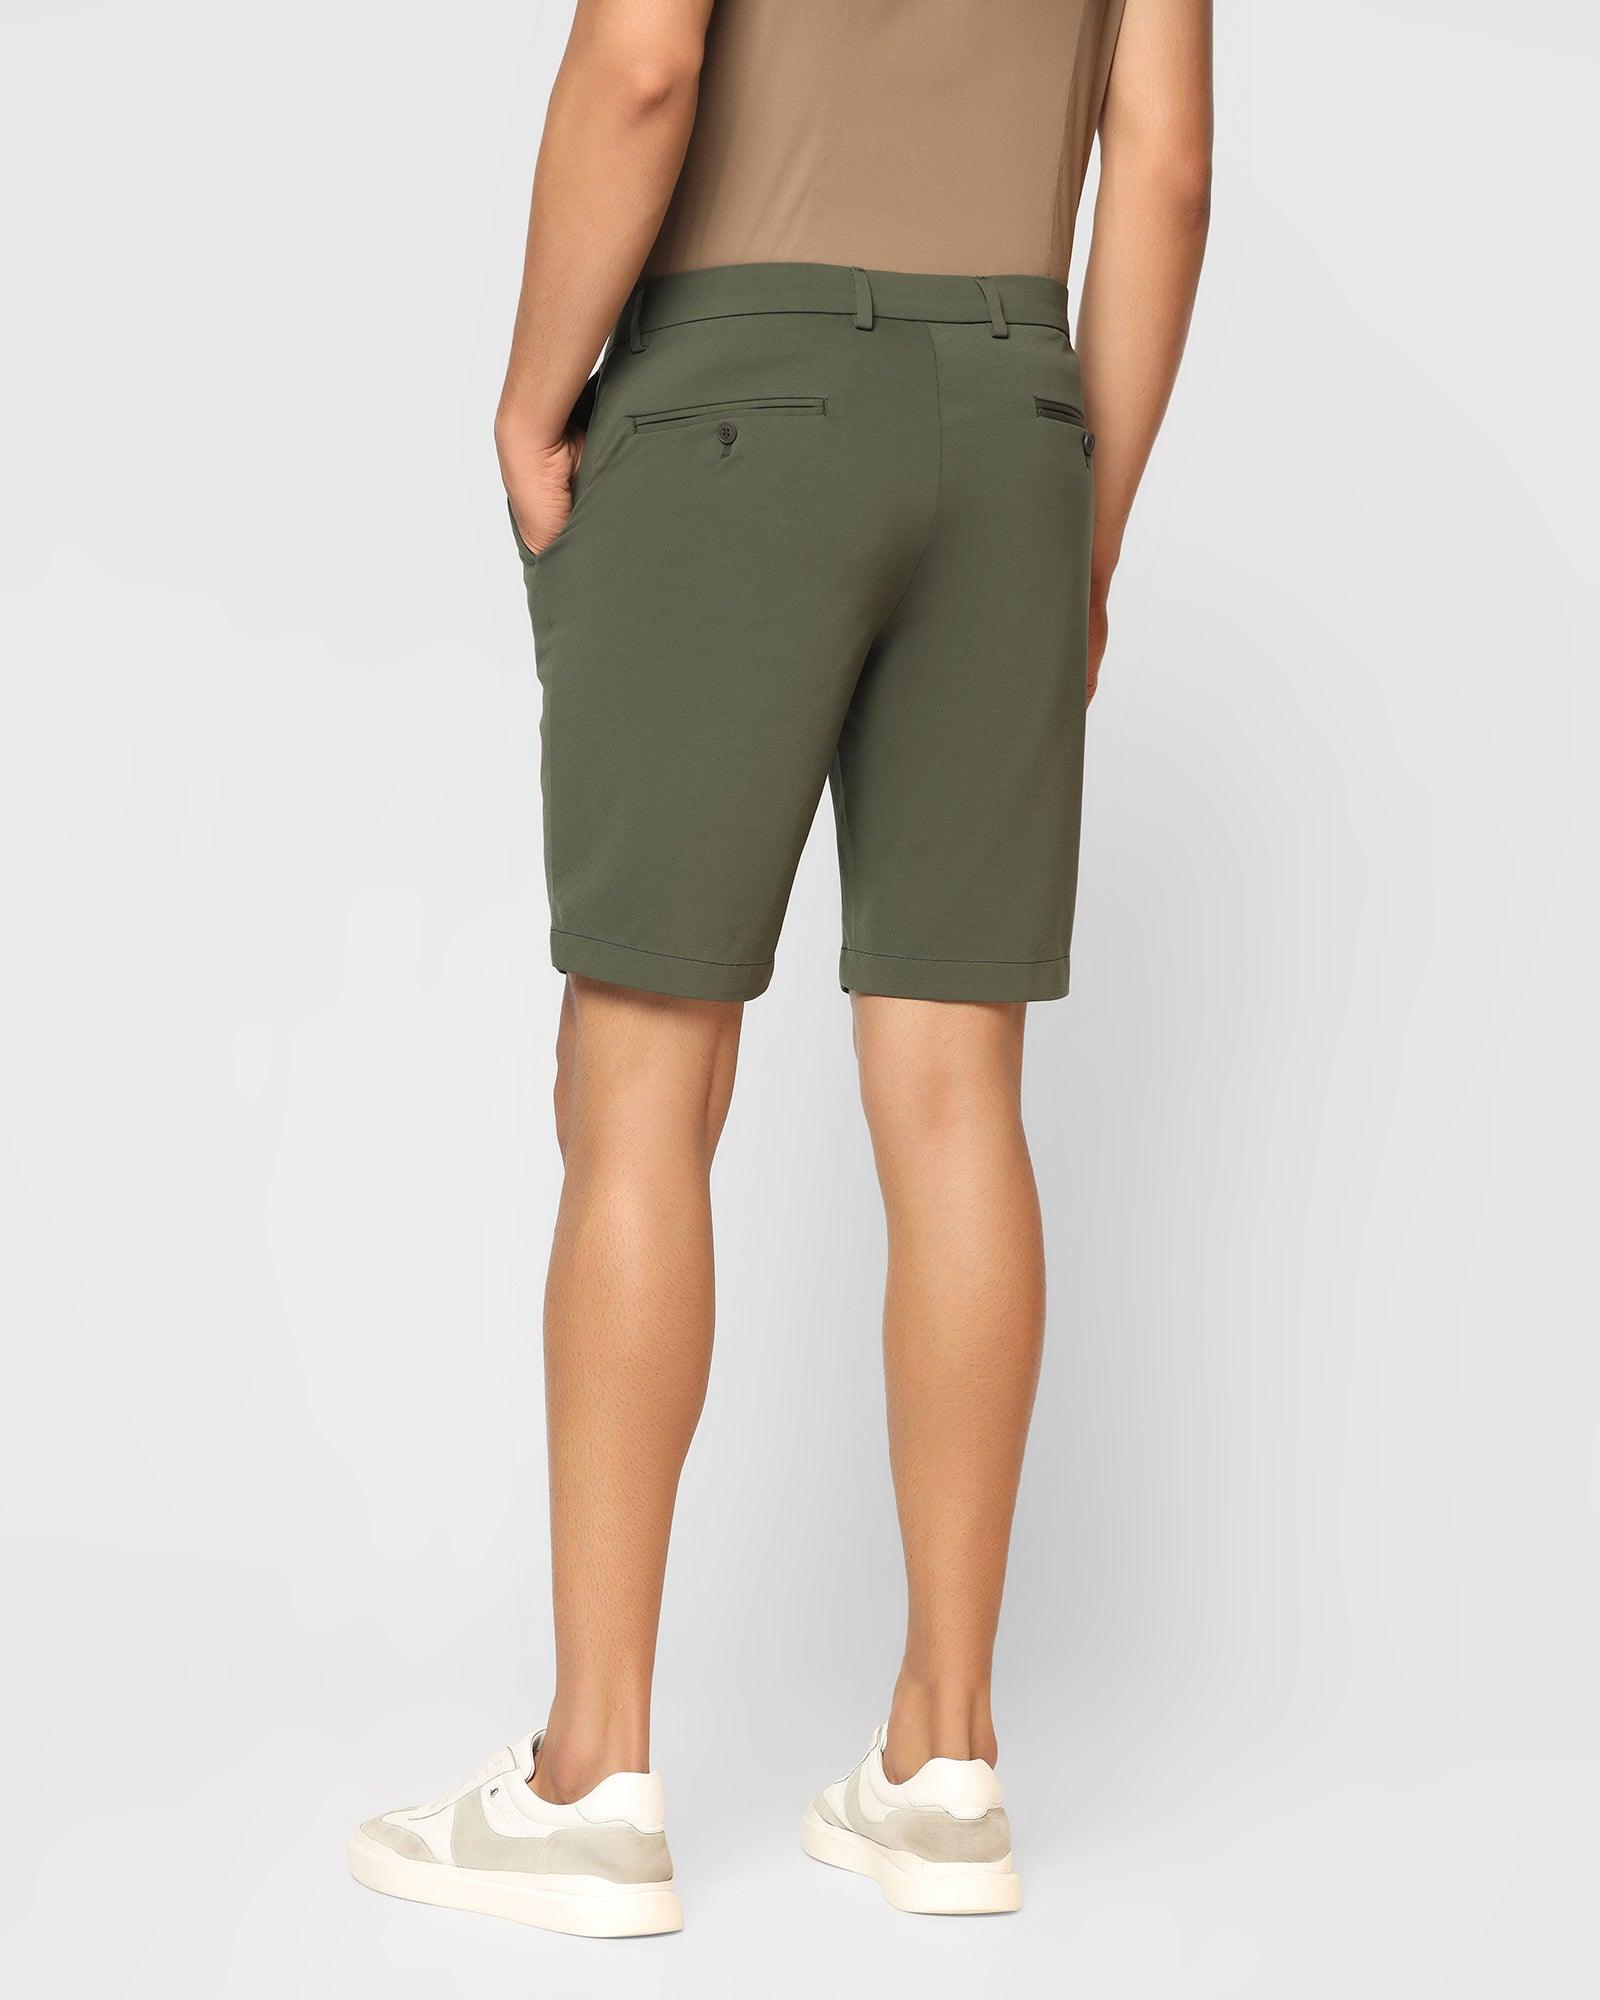 TechPro Casual Dark Olive Solid Shorts - Serry